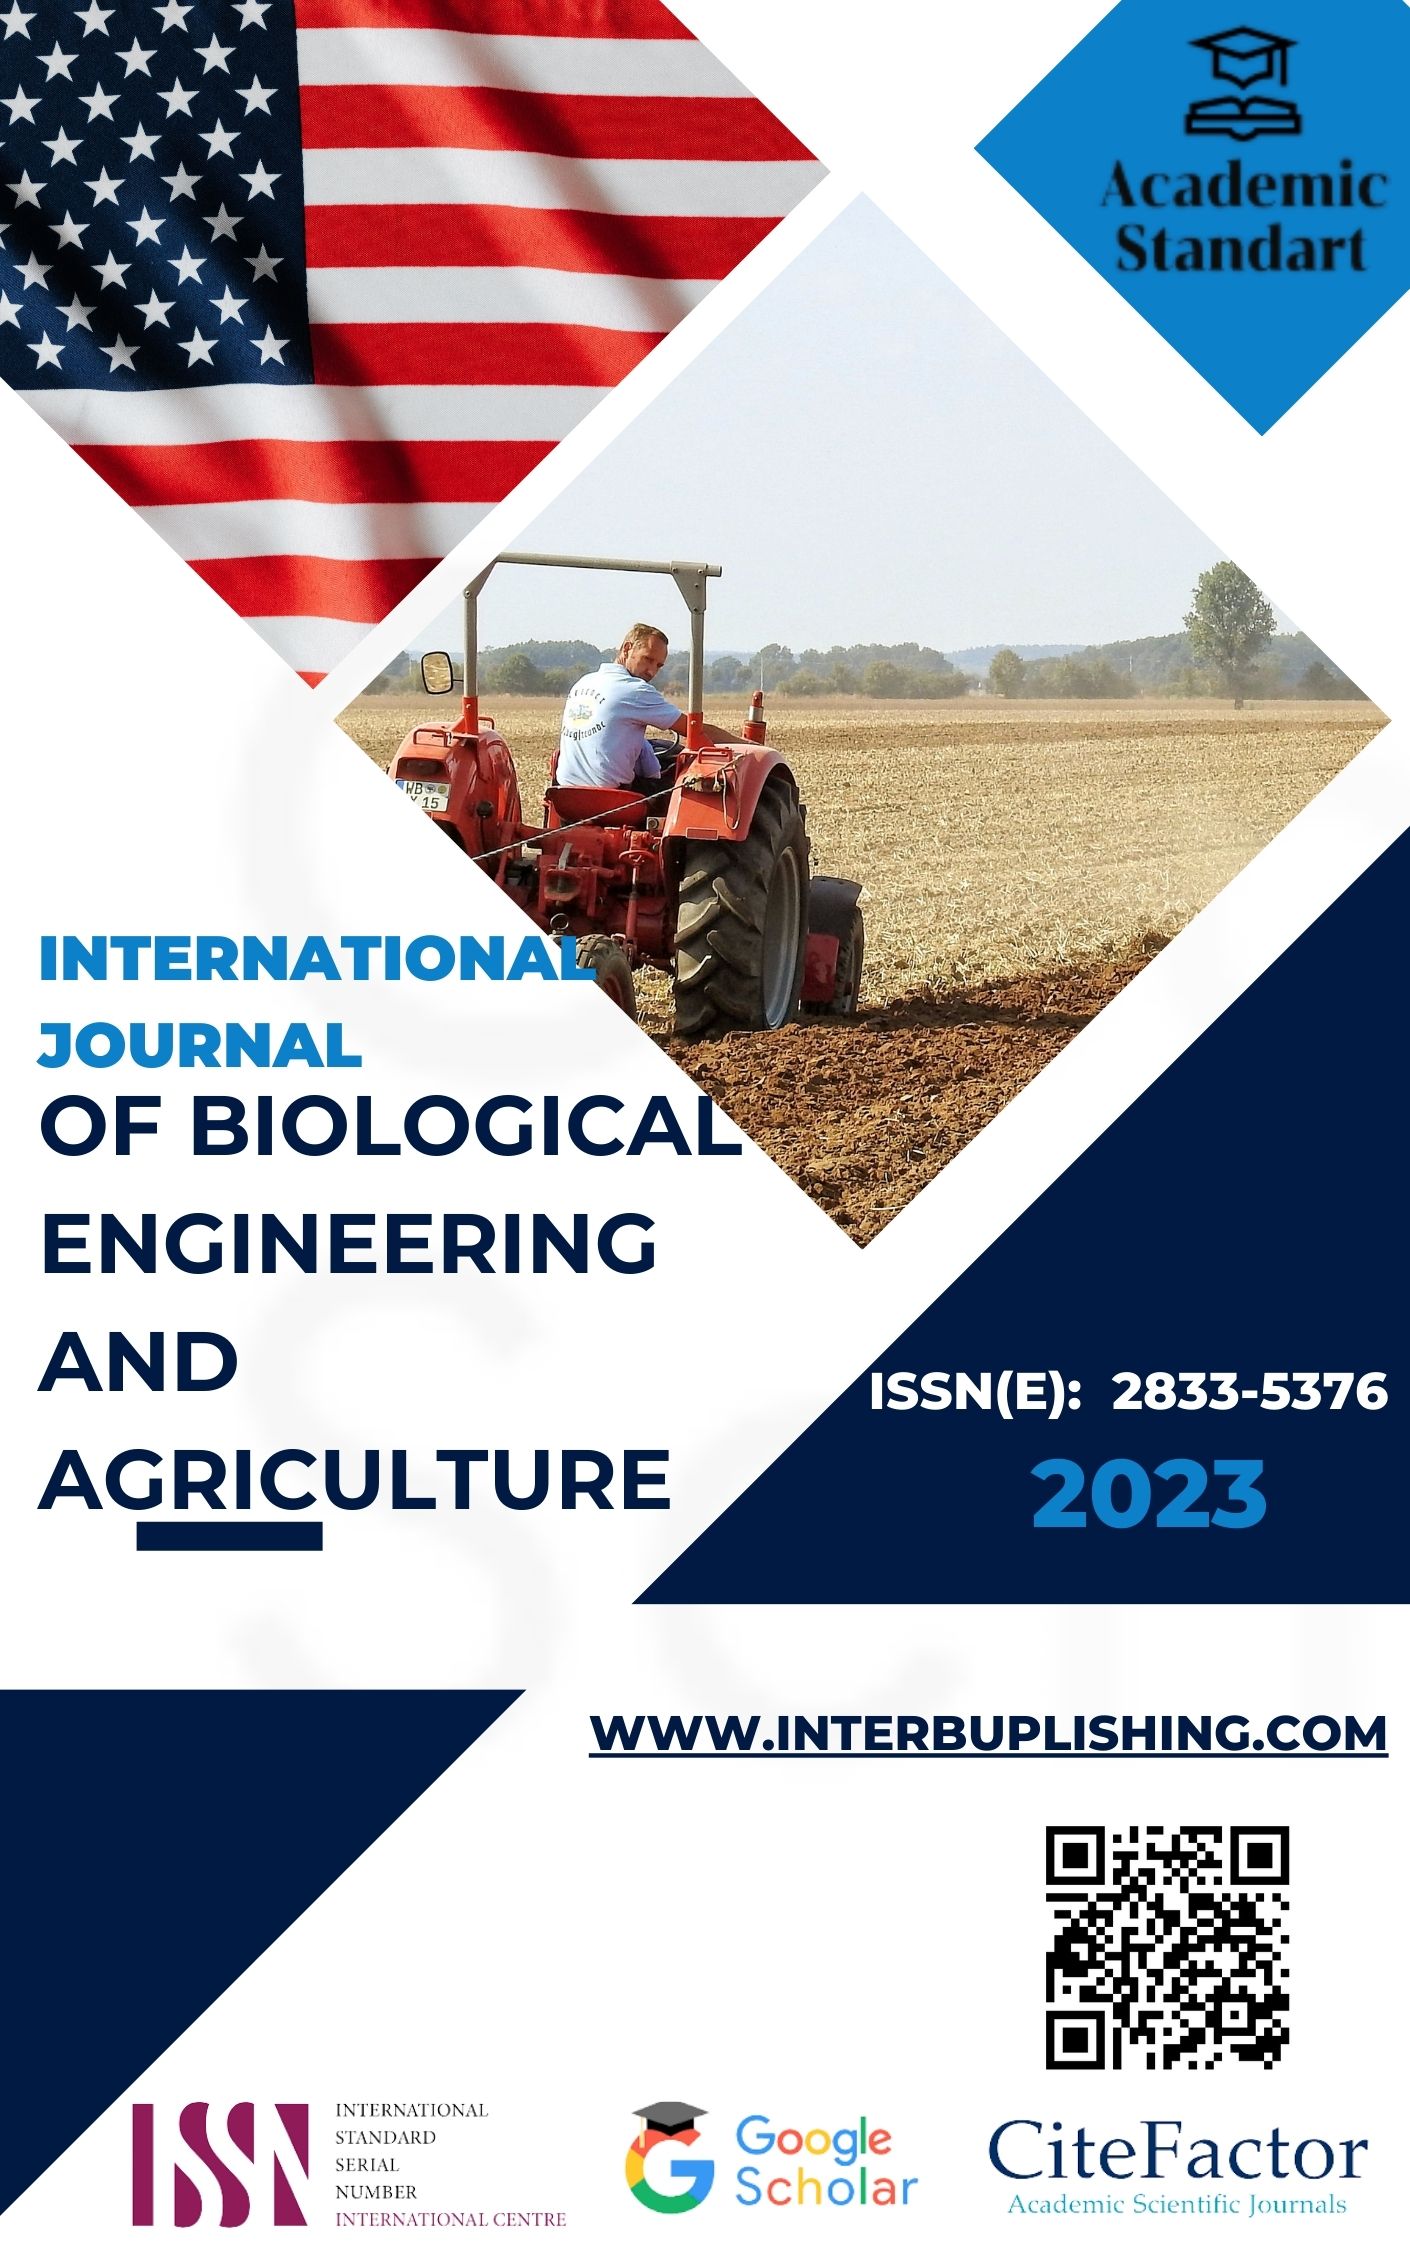 INTERNATIONAL JOURNAL OF BIOLOGICAL ENGINEERING AND AGRICULTURE